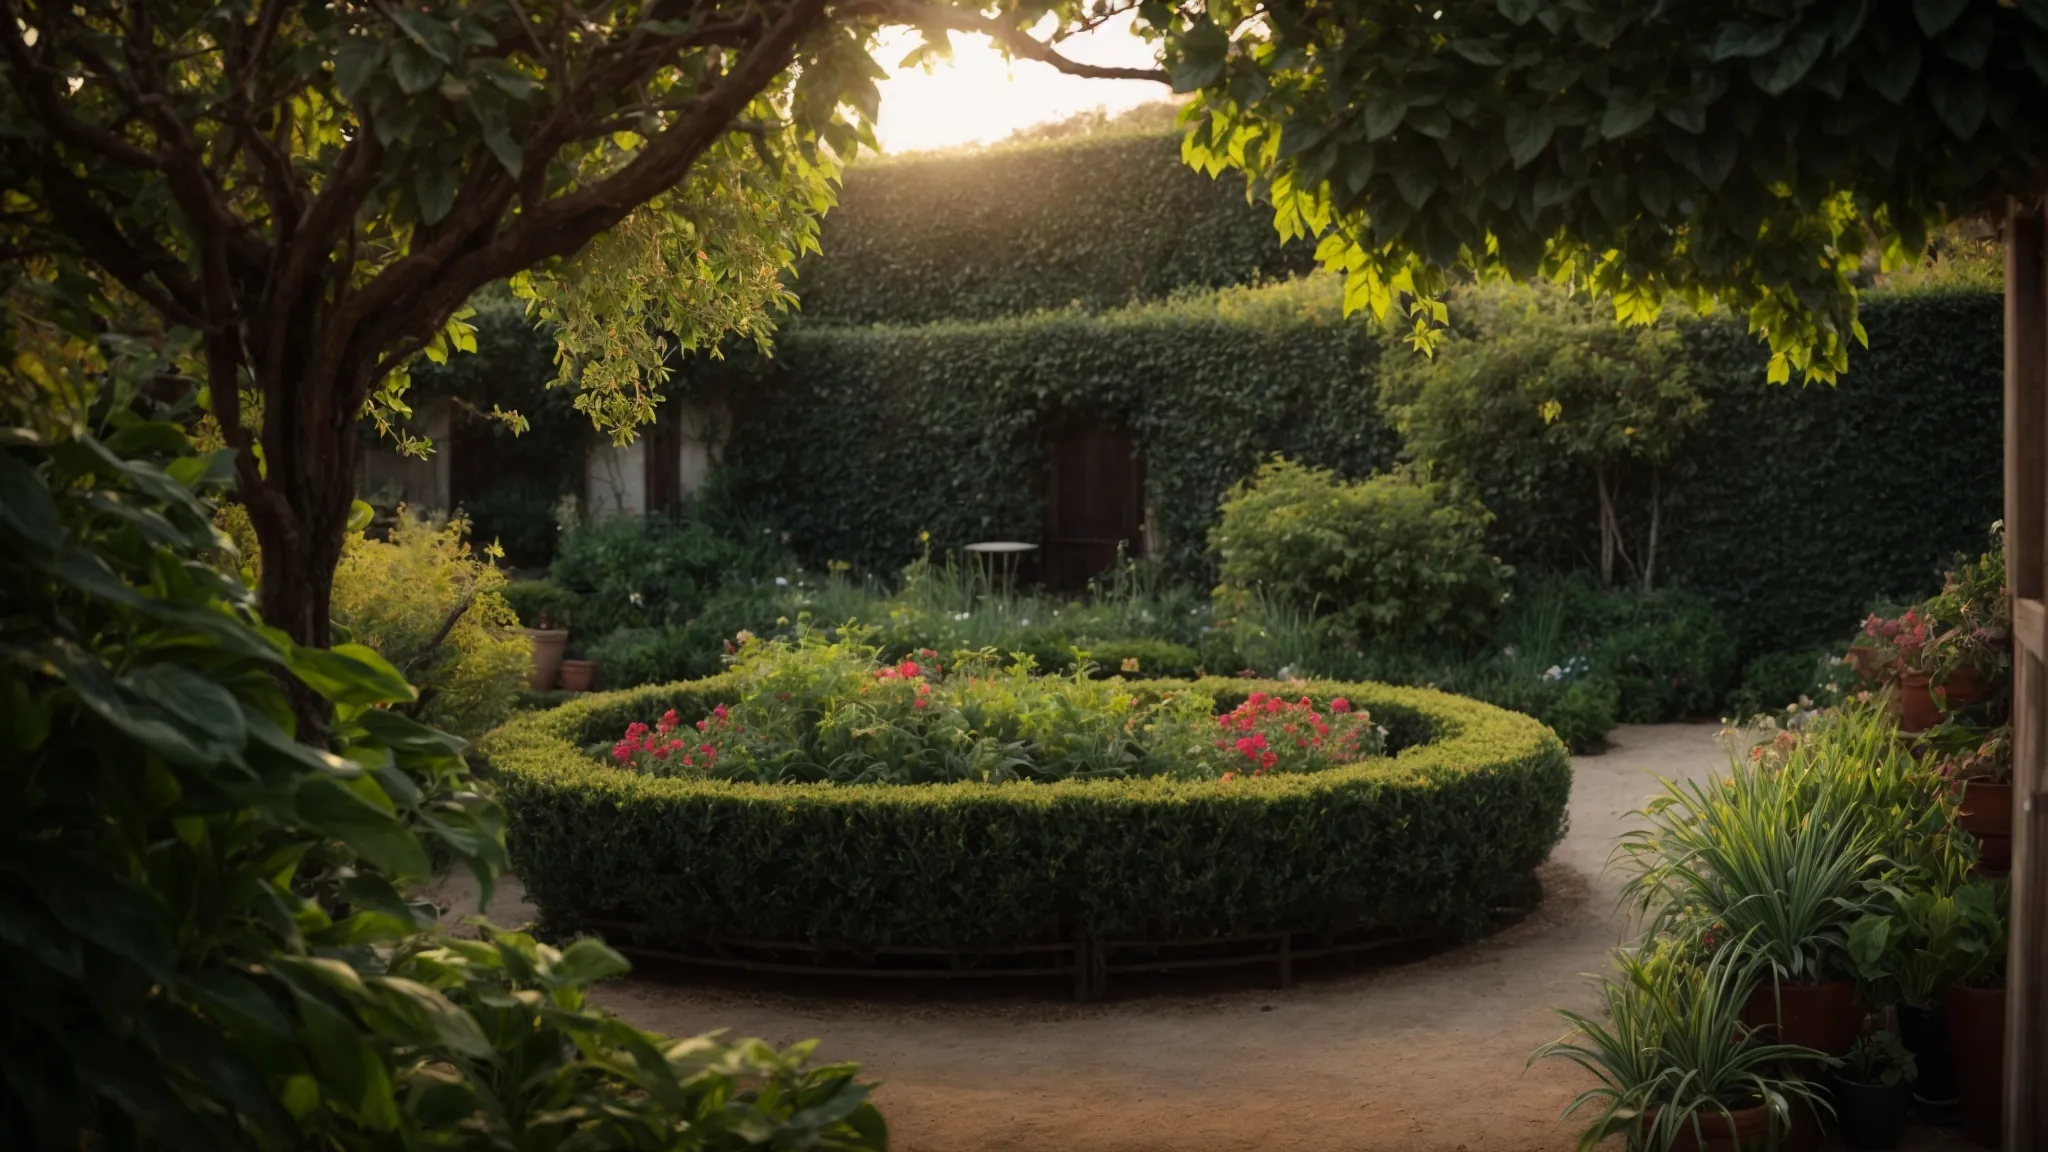 a well-tended garden with vibrant plants connected by intertwining vines under the glow of morning sunlight.